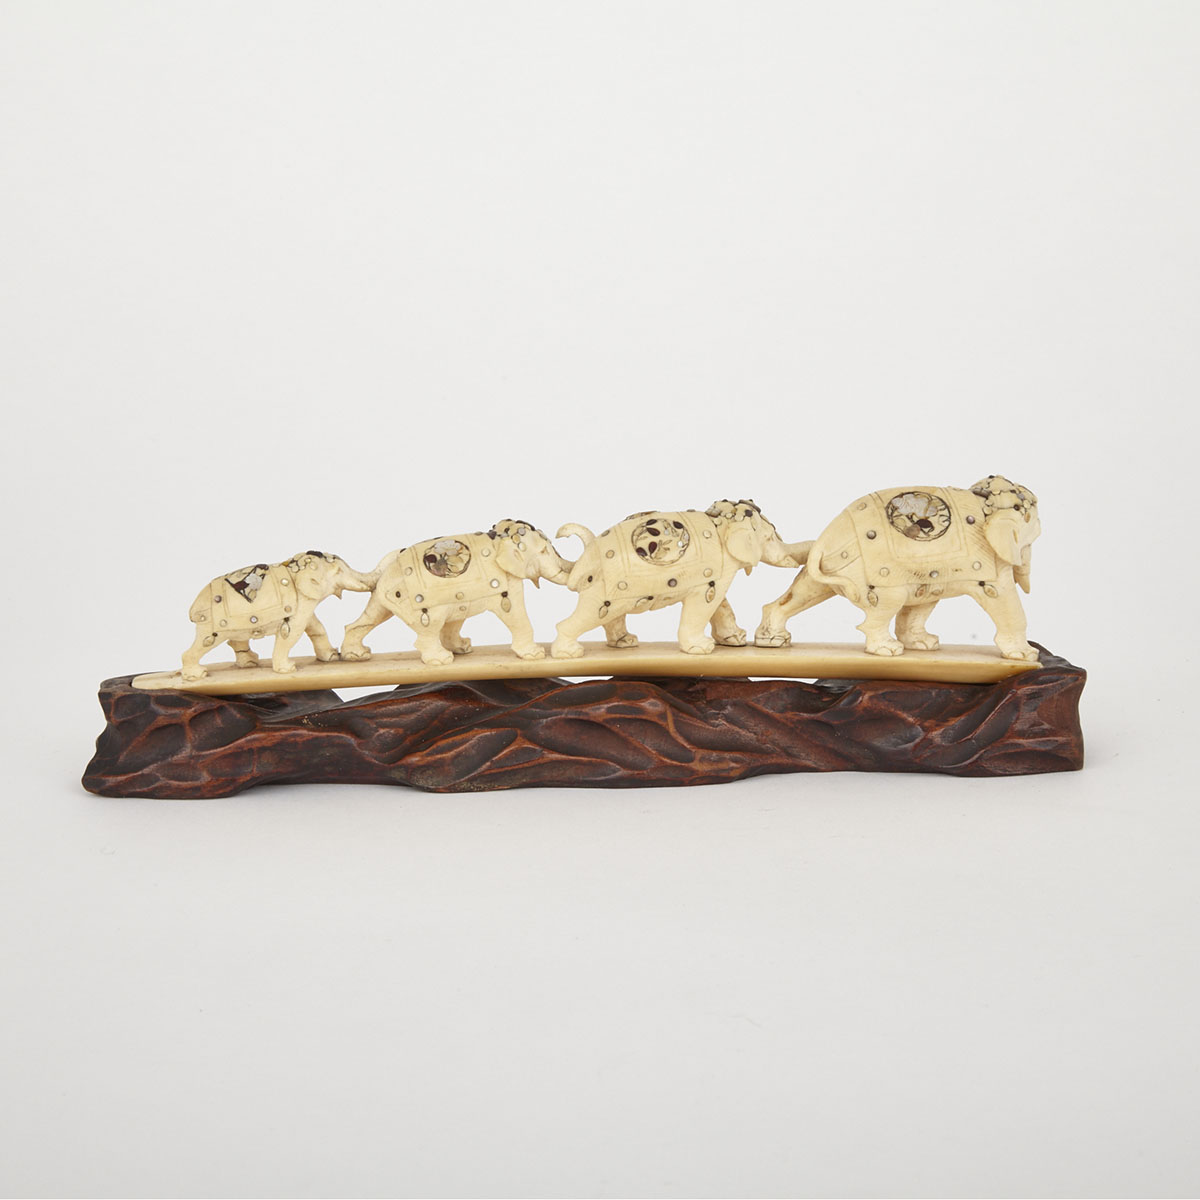 Carved Ivory Elephants, India, Late 19th Century (Stand Later)